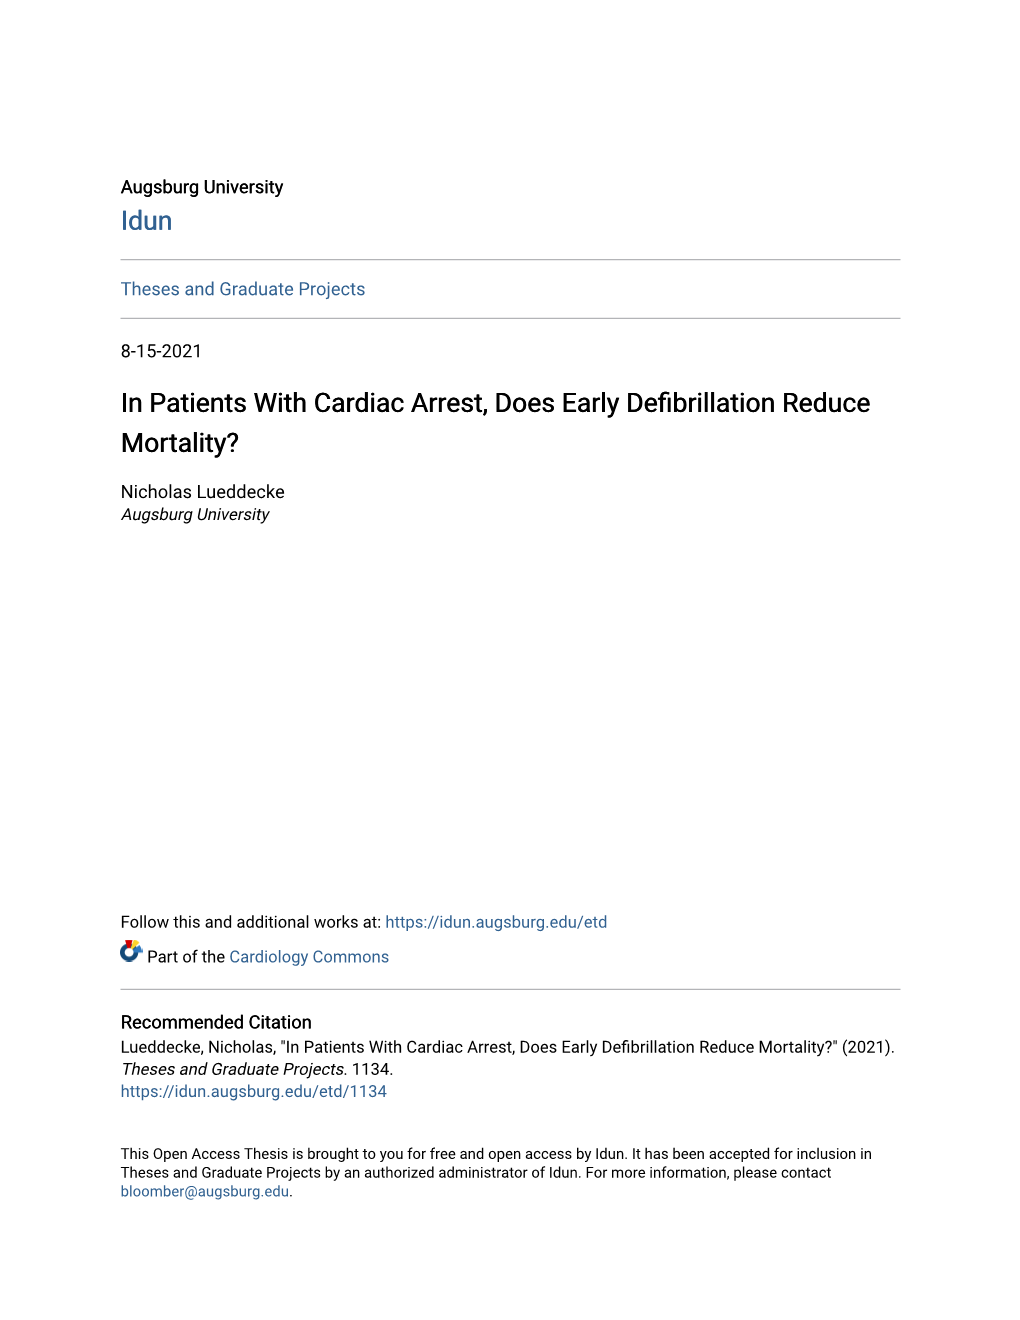 In Patients with Cardiac Arrest, Does Early Defibrillation Reduce Mortality?